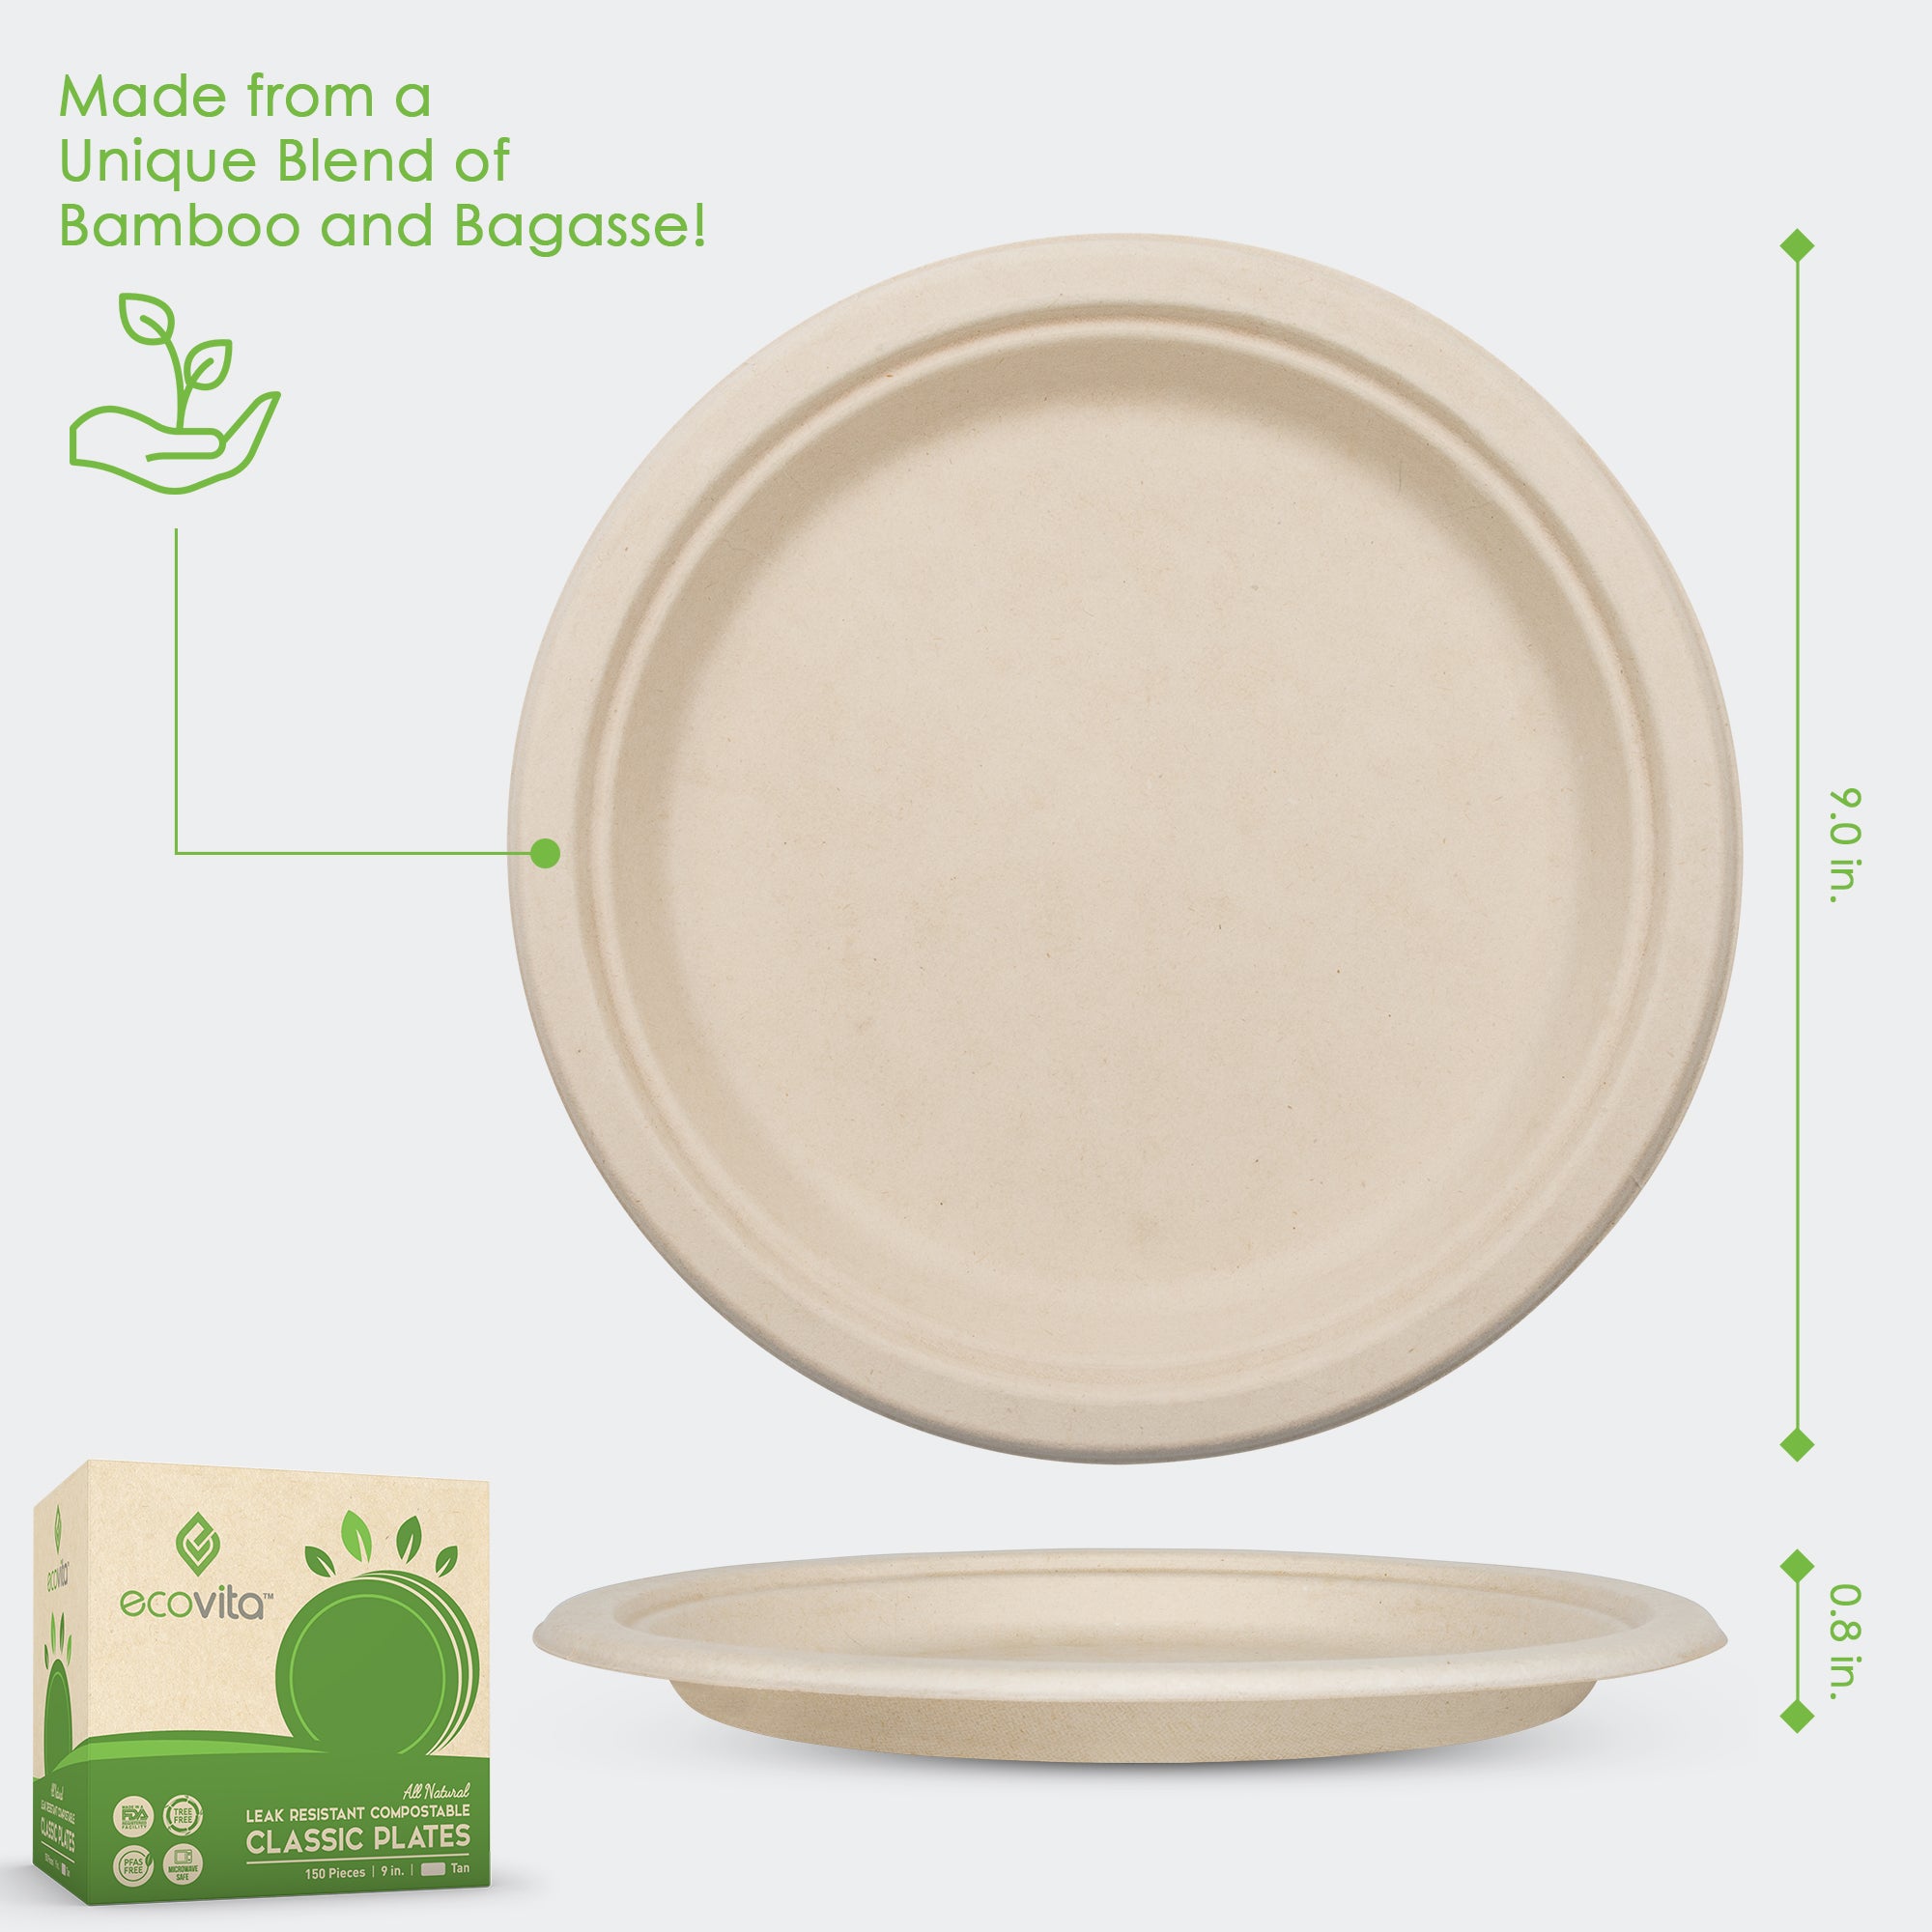 100/150/150Pcs 6 Inch Small Paper Plate Compostable Disposable